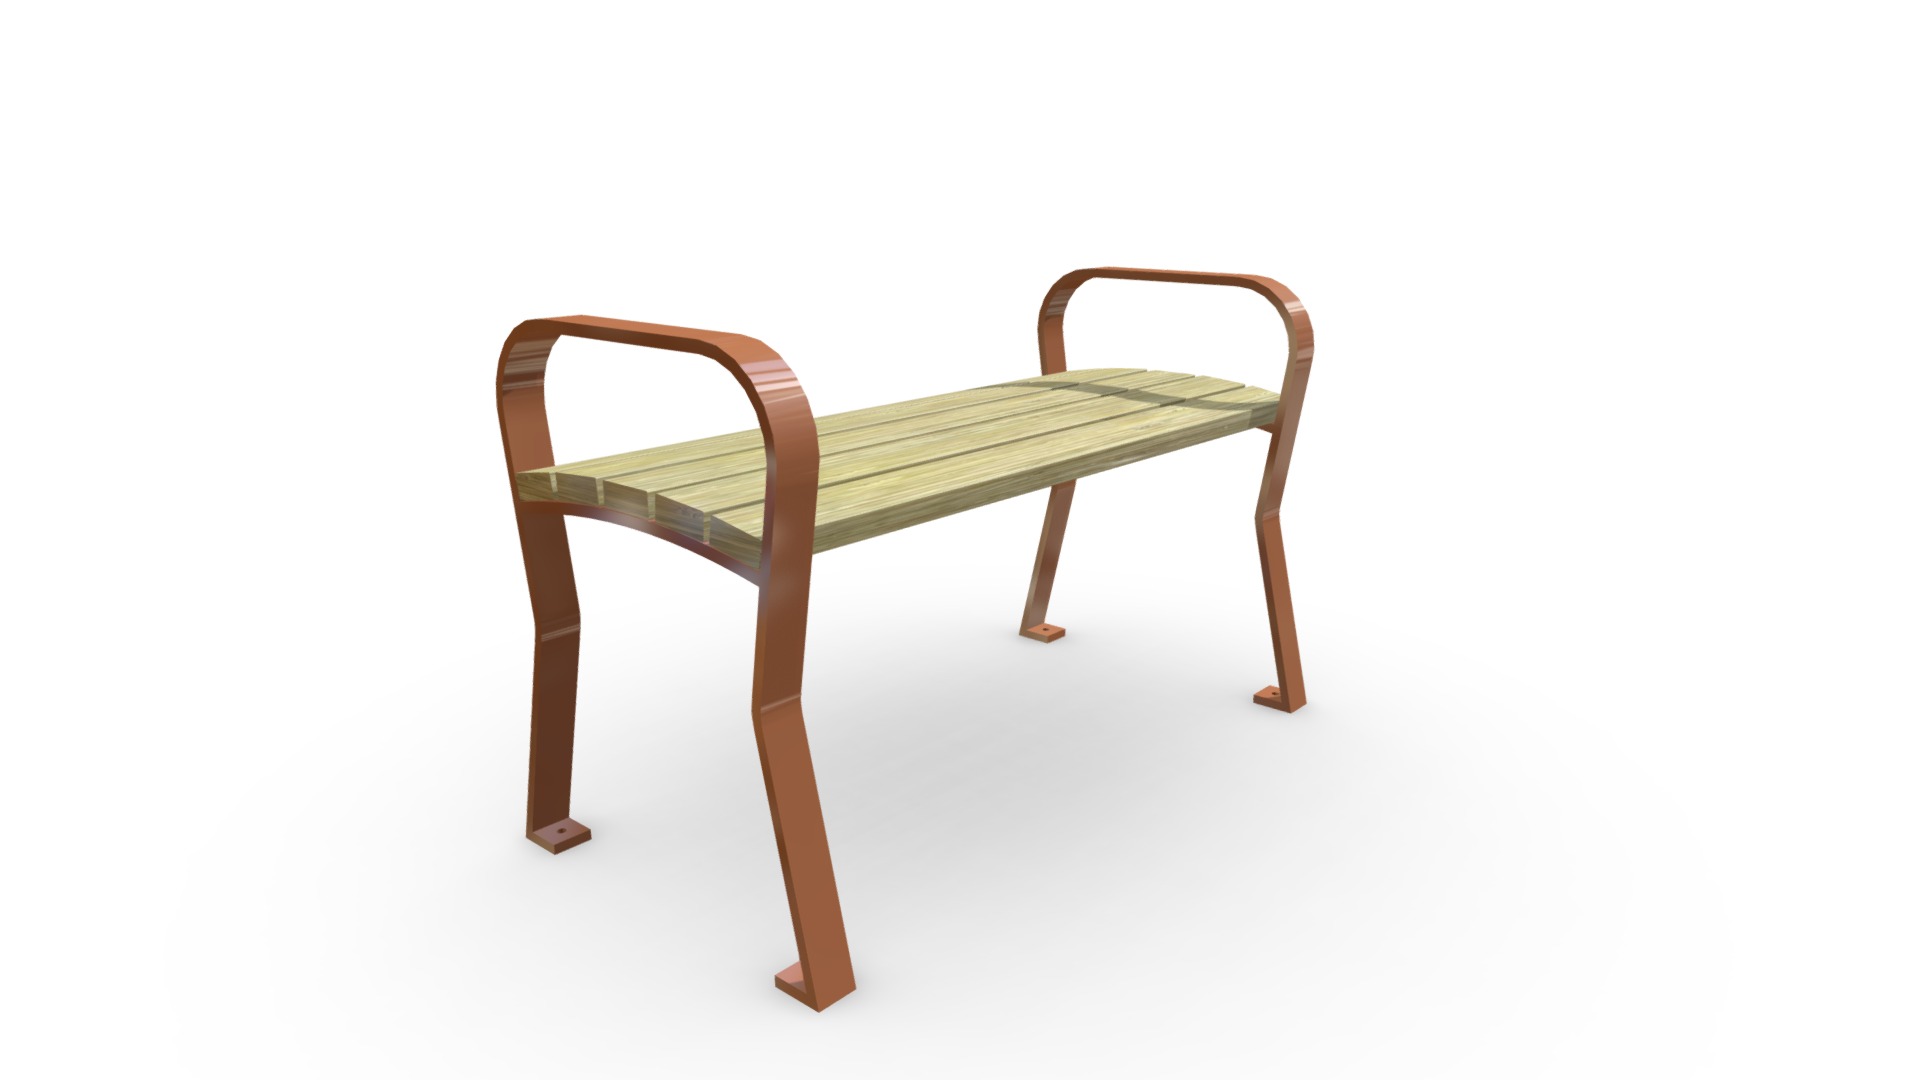 3D model SC-08.1,0 - This is a 3D model of the SC-08.1,0. The 3D model is about a wooden chair with a cushion.